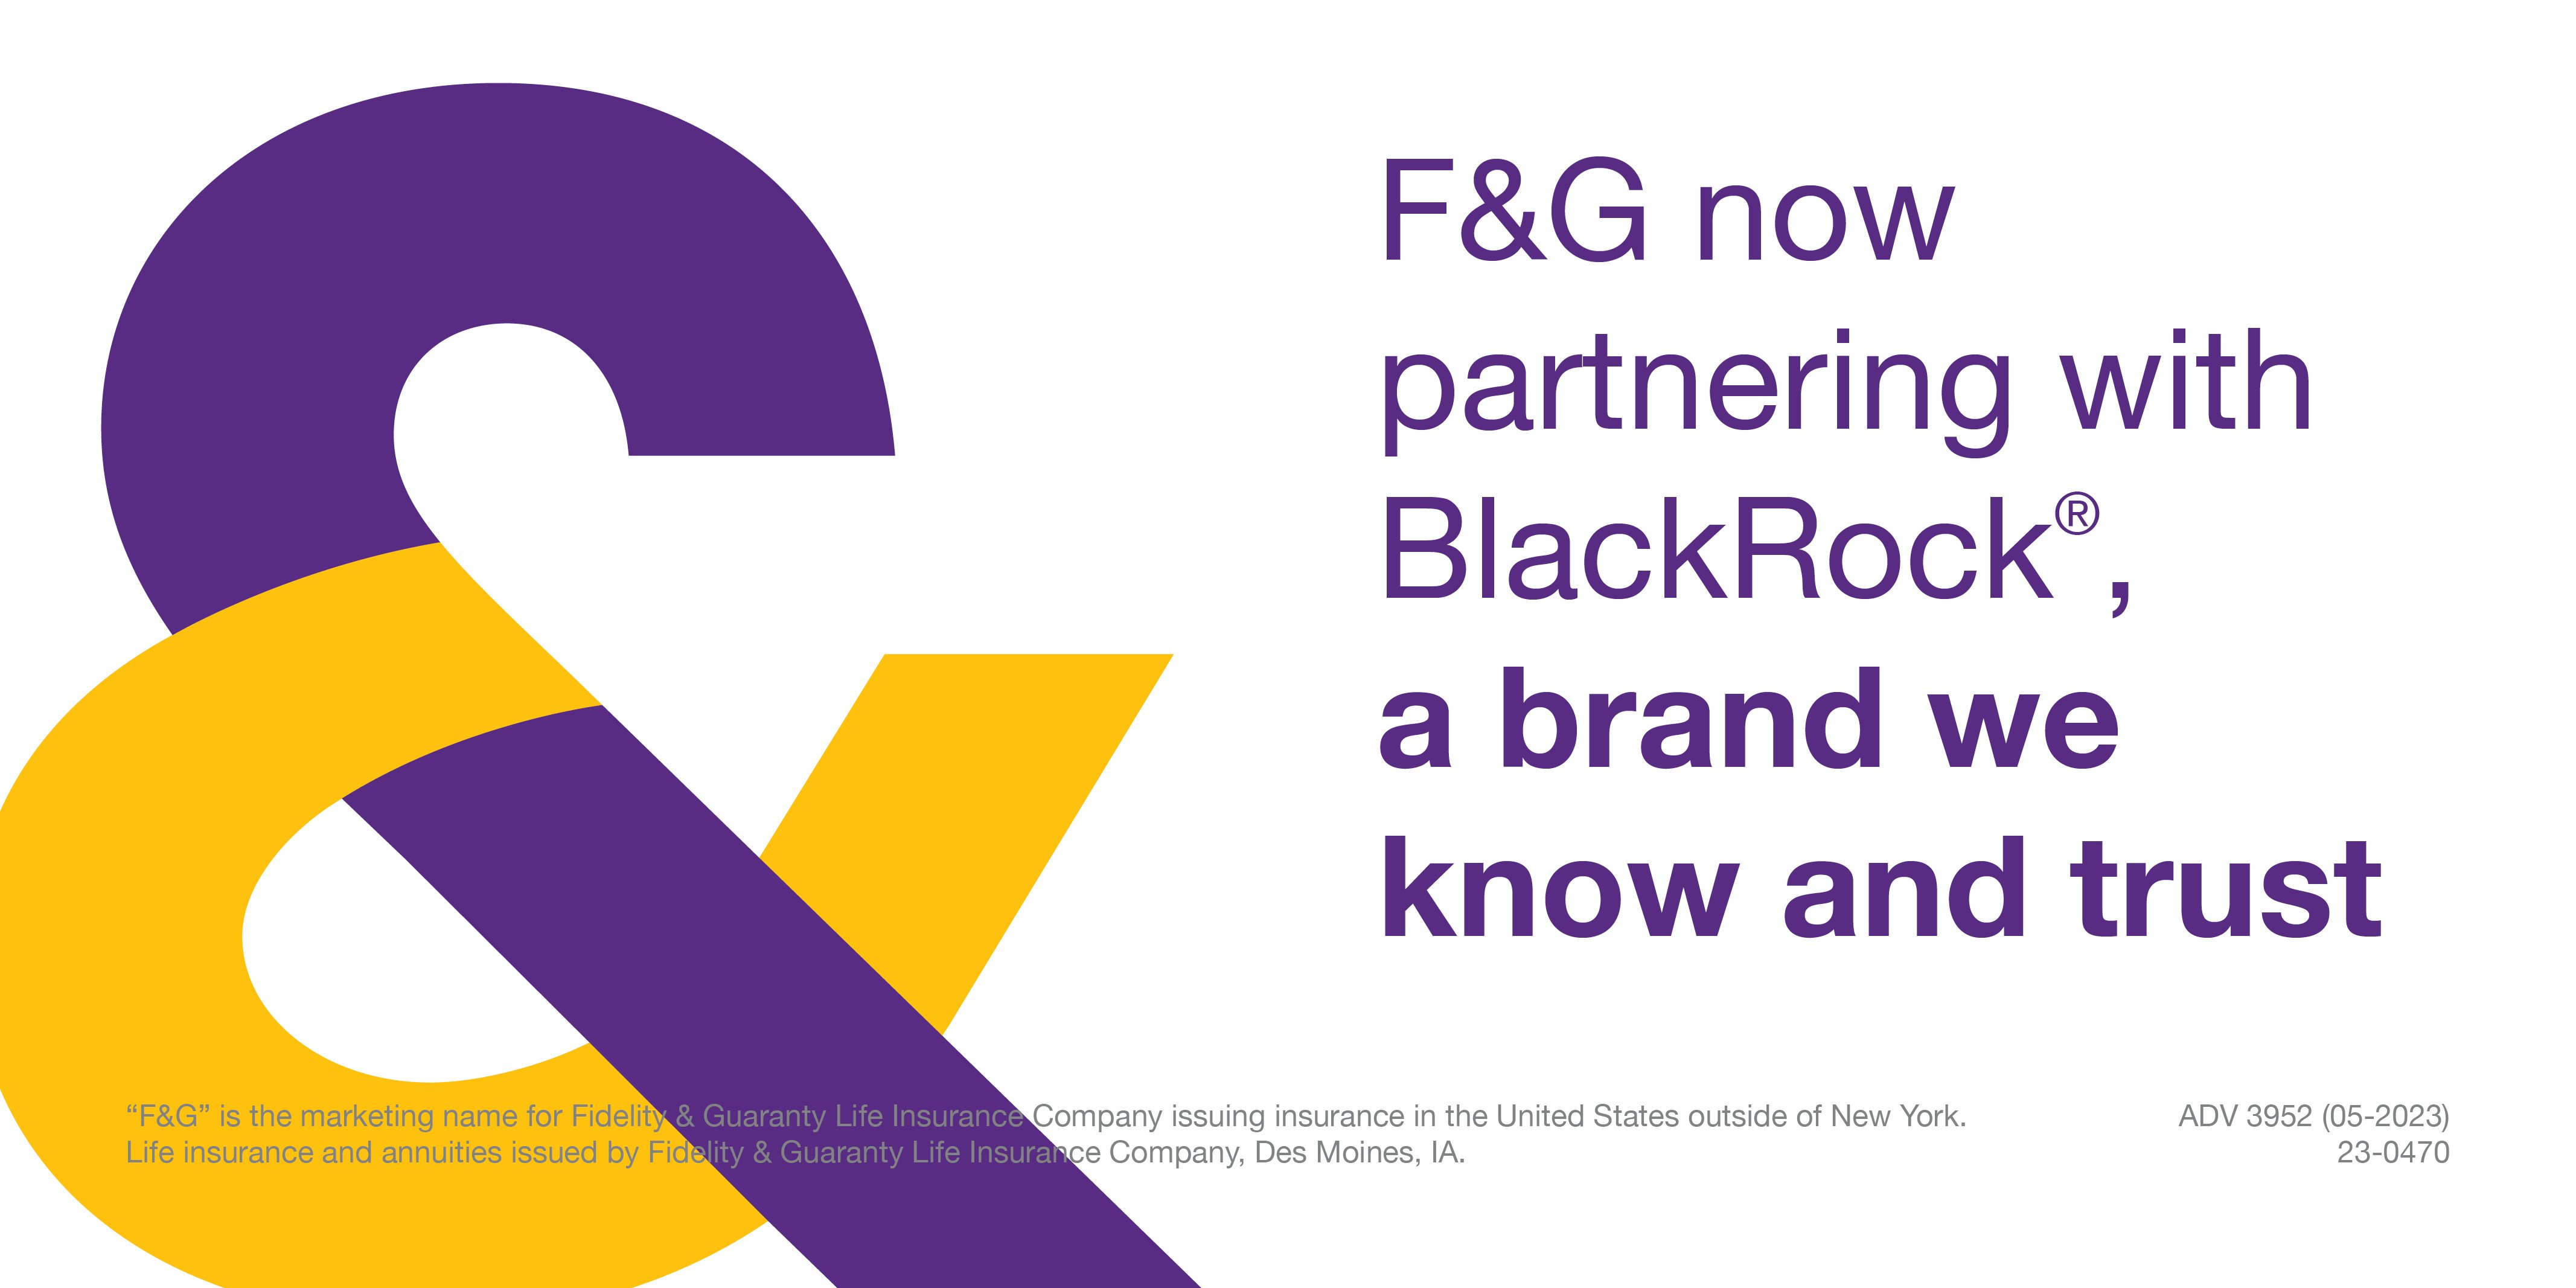 F&G now partnering with BlackRock, a brand we know and trust